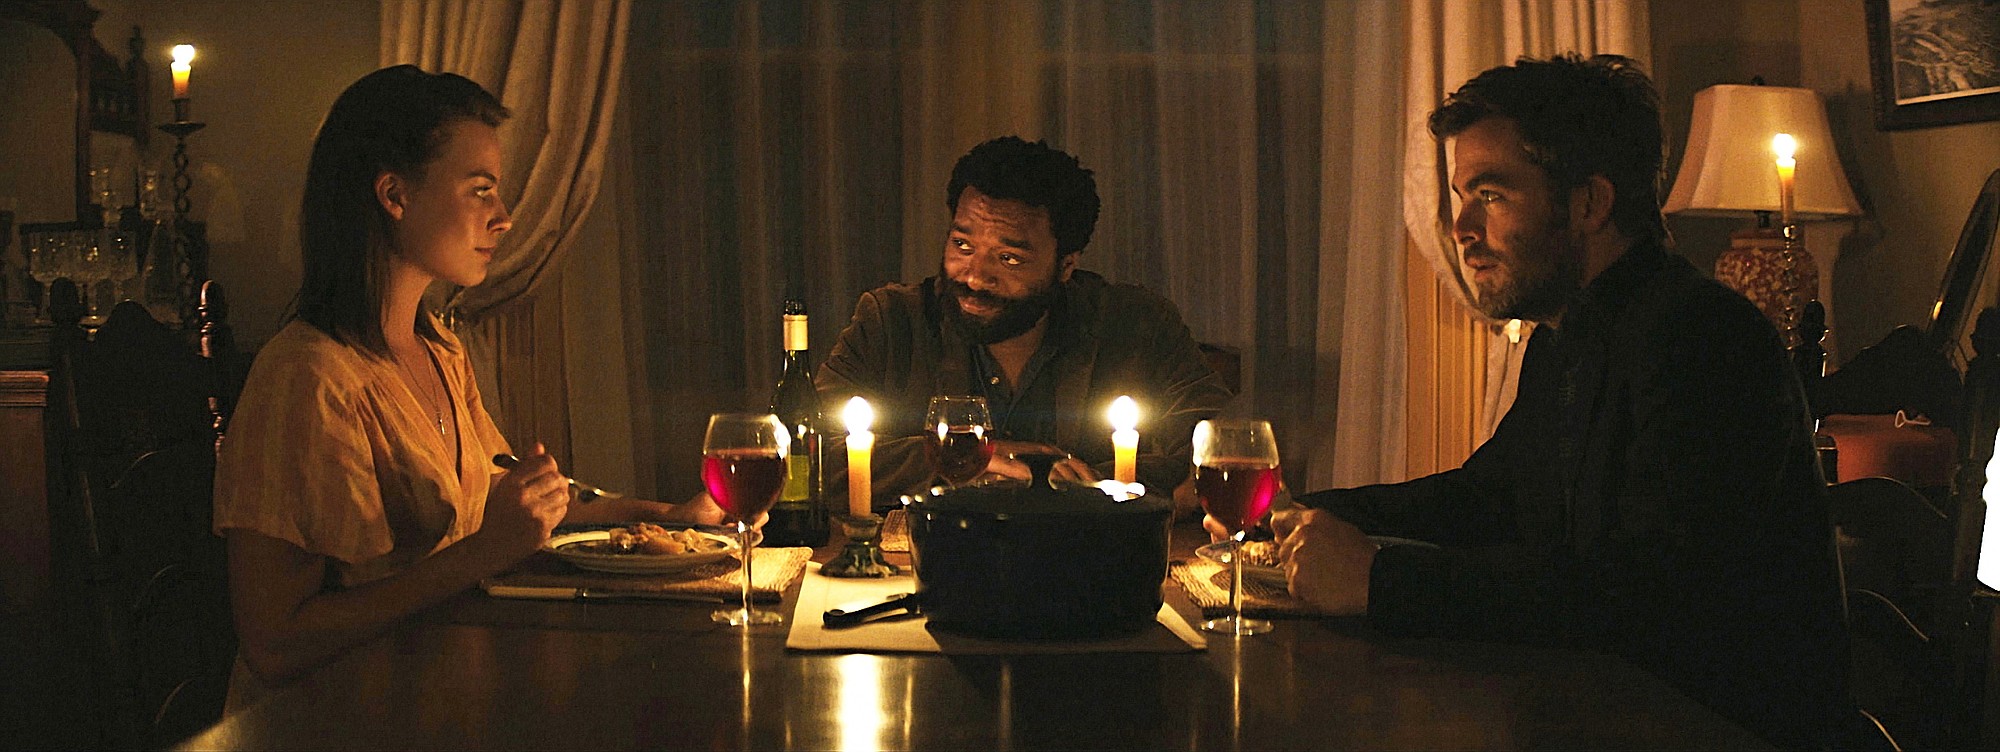 Margot Robbie, from left, as Ann Burden, Chiwetel Ejiofor as Loomis, and Chris Pine as Caleb, in the film &quot;Z for Zachariah.&quot;